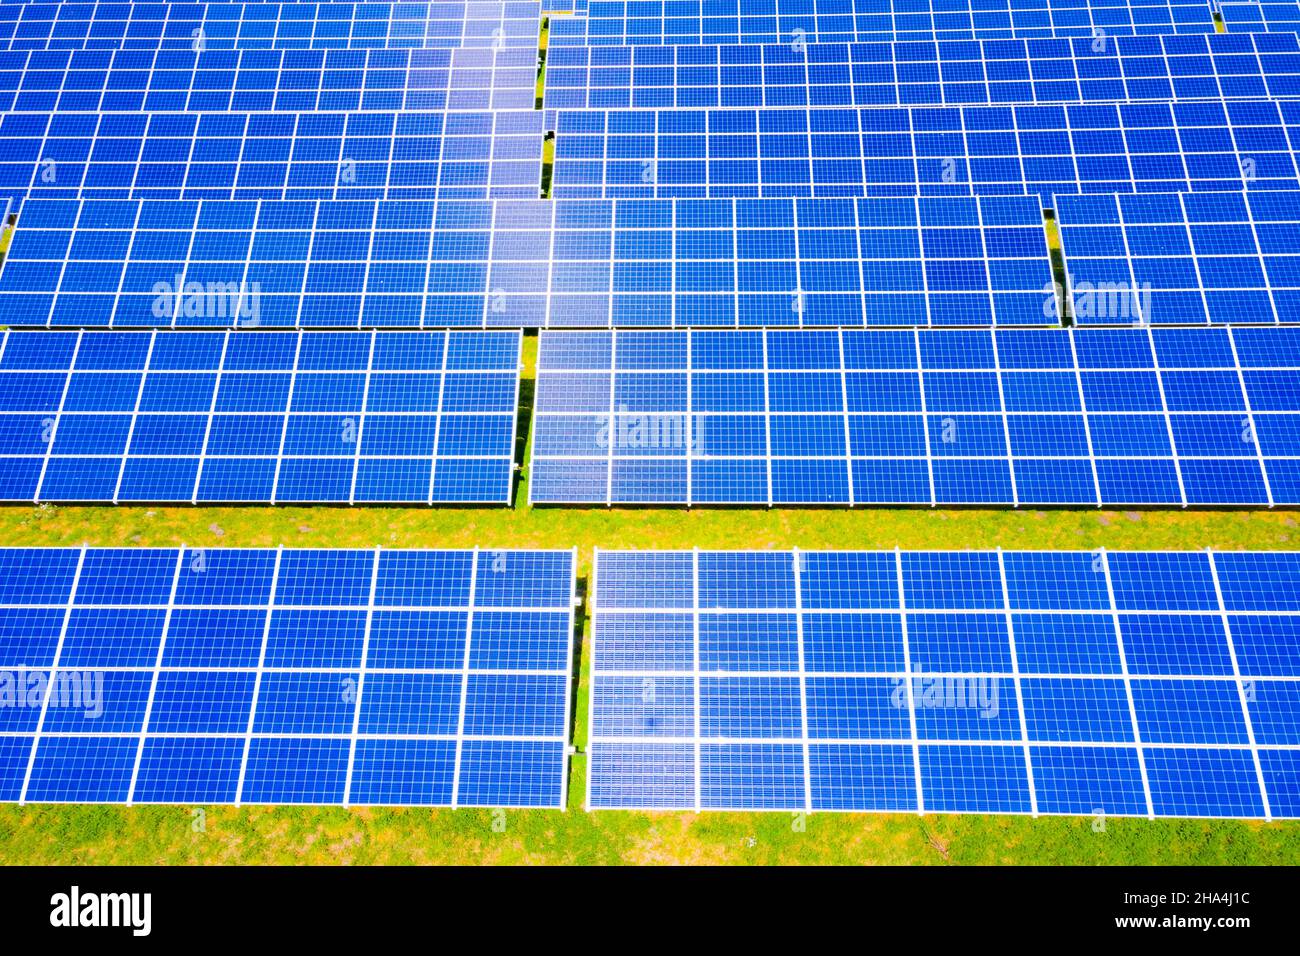 Renewable Energy and Sustainable Development / Park of Photovoltaic Solar Panels . Aerial view of Solar panels Photovoltaic systems industrial landsca Stock Photo